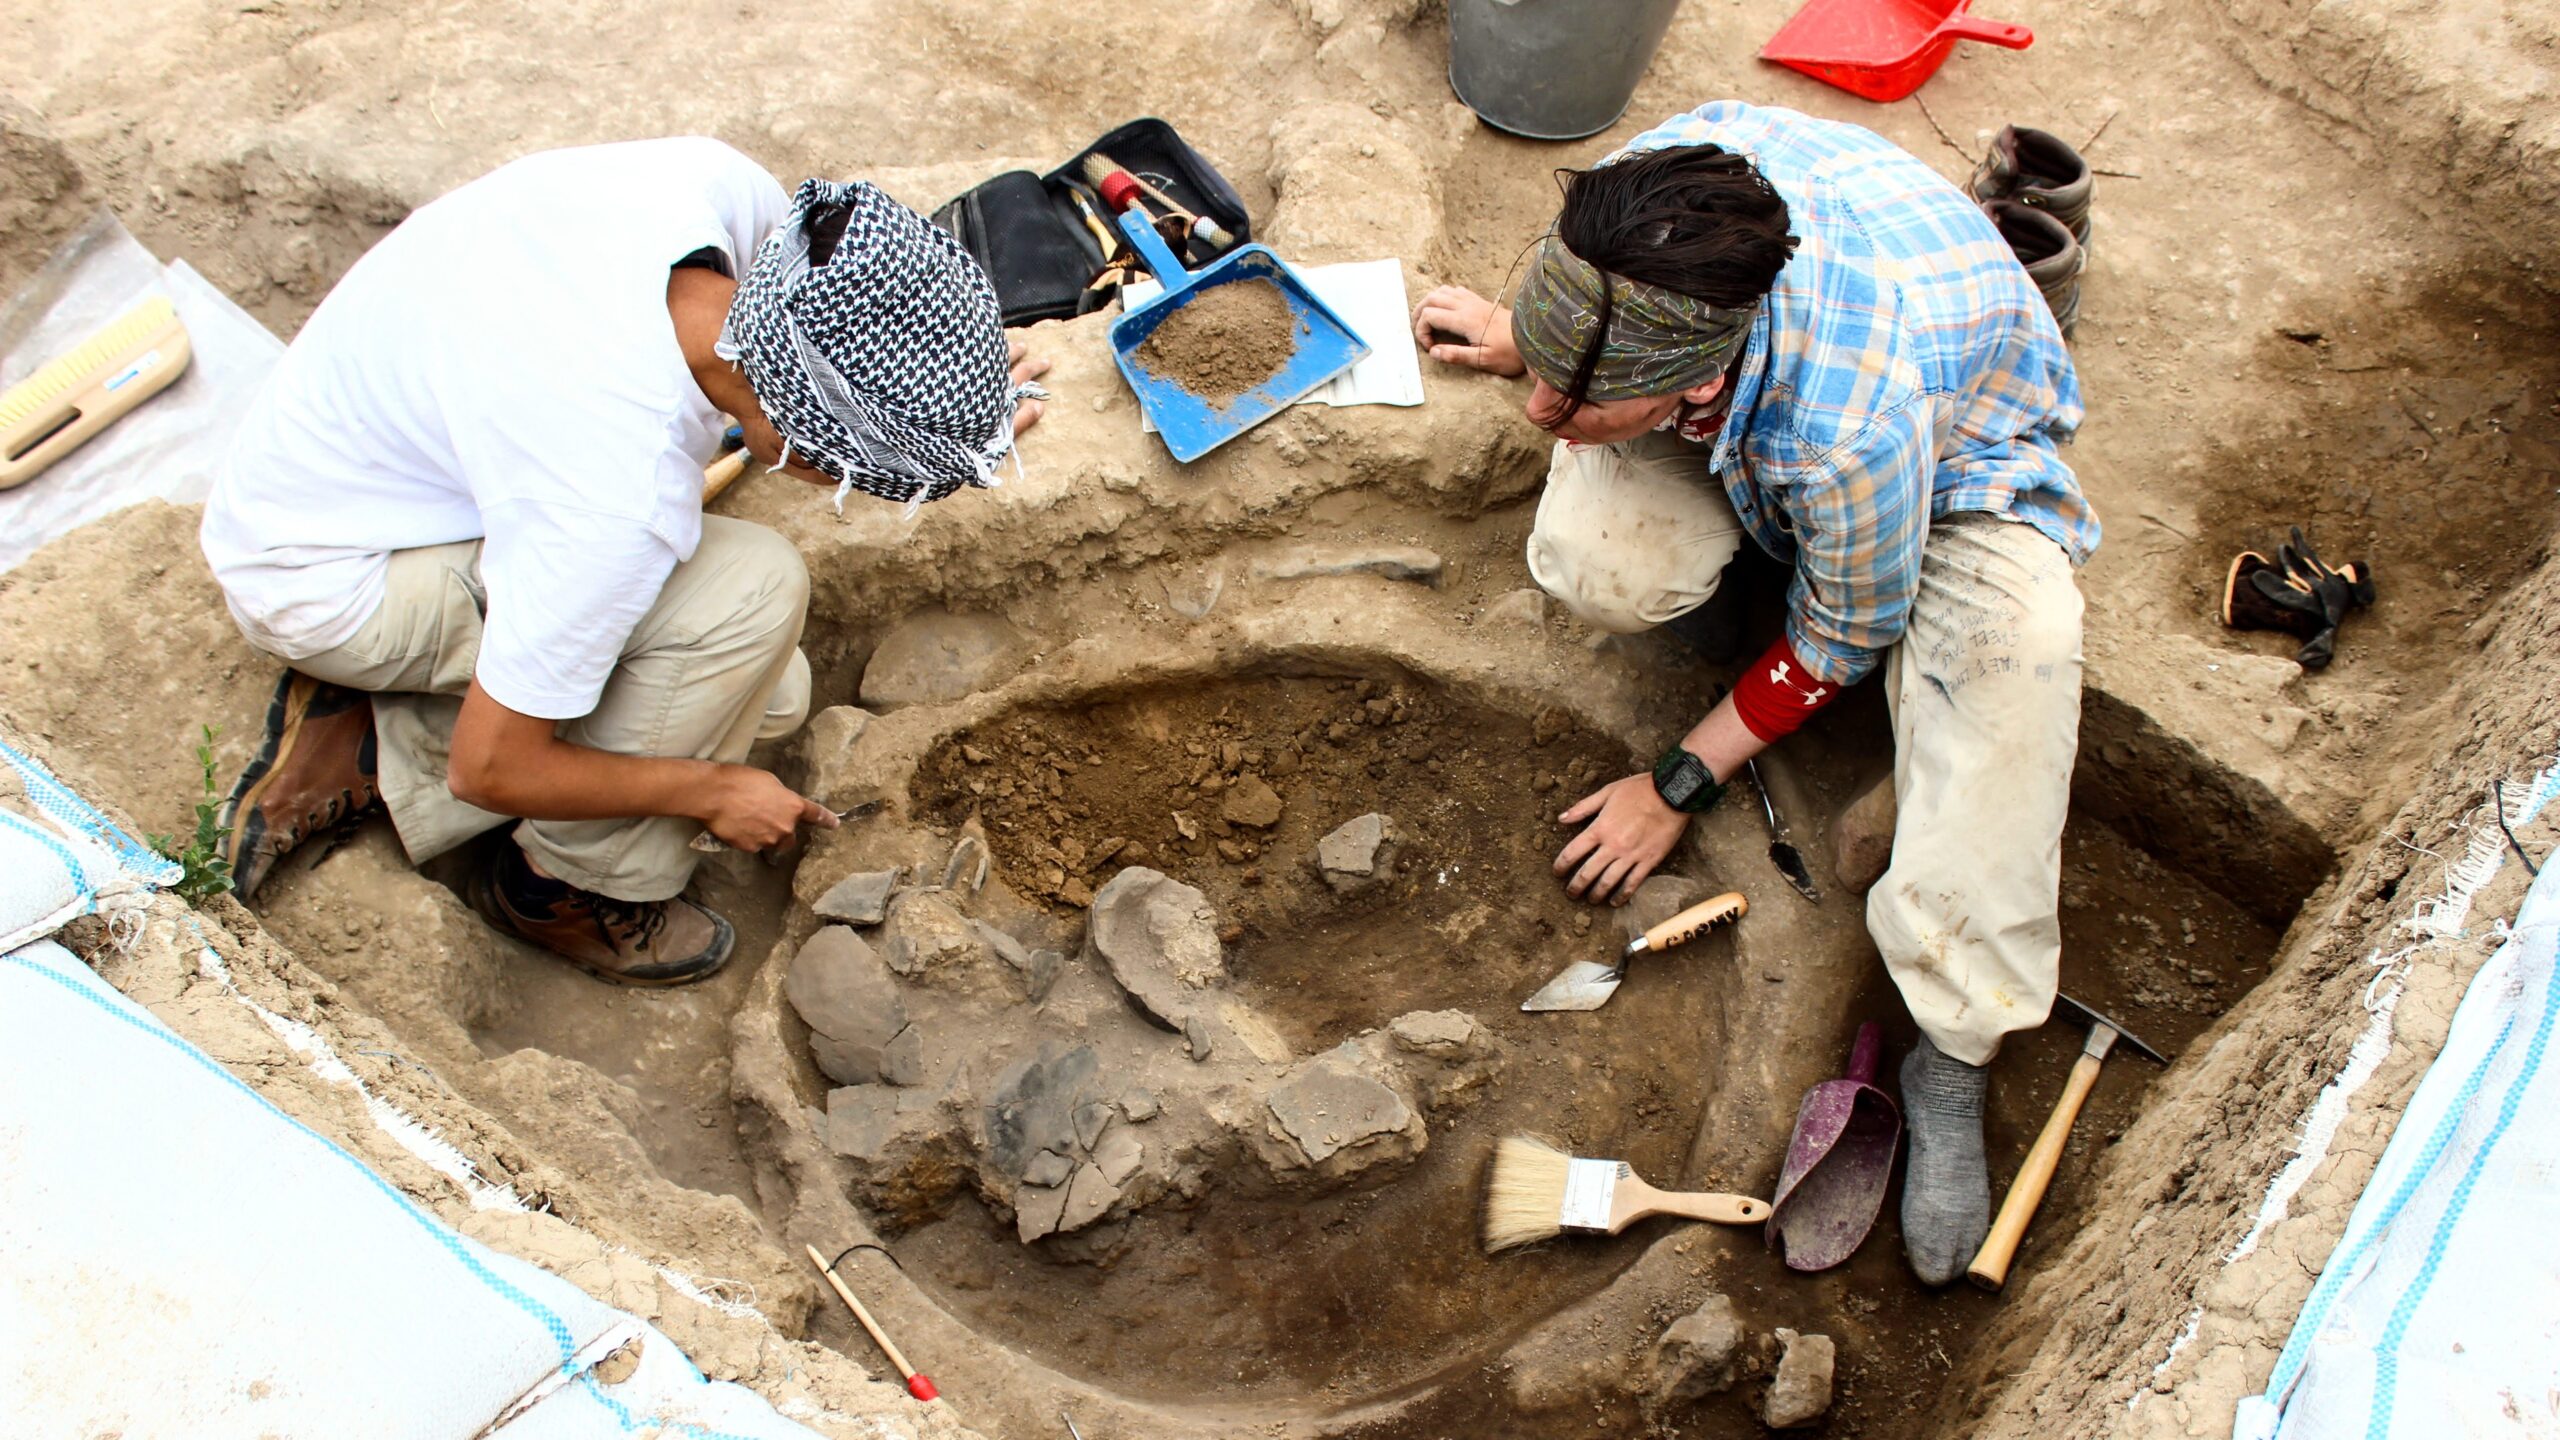 Students on an archaeology dig site